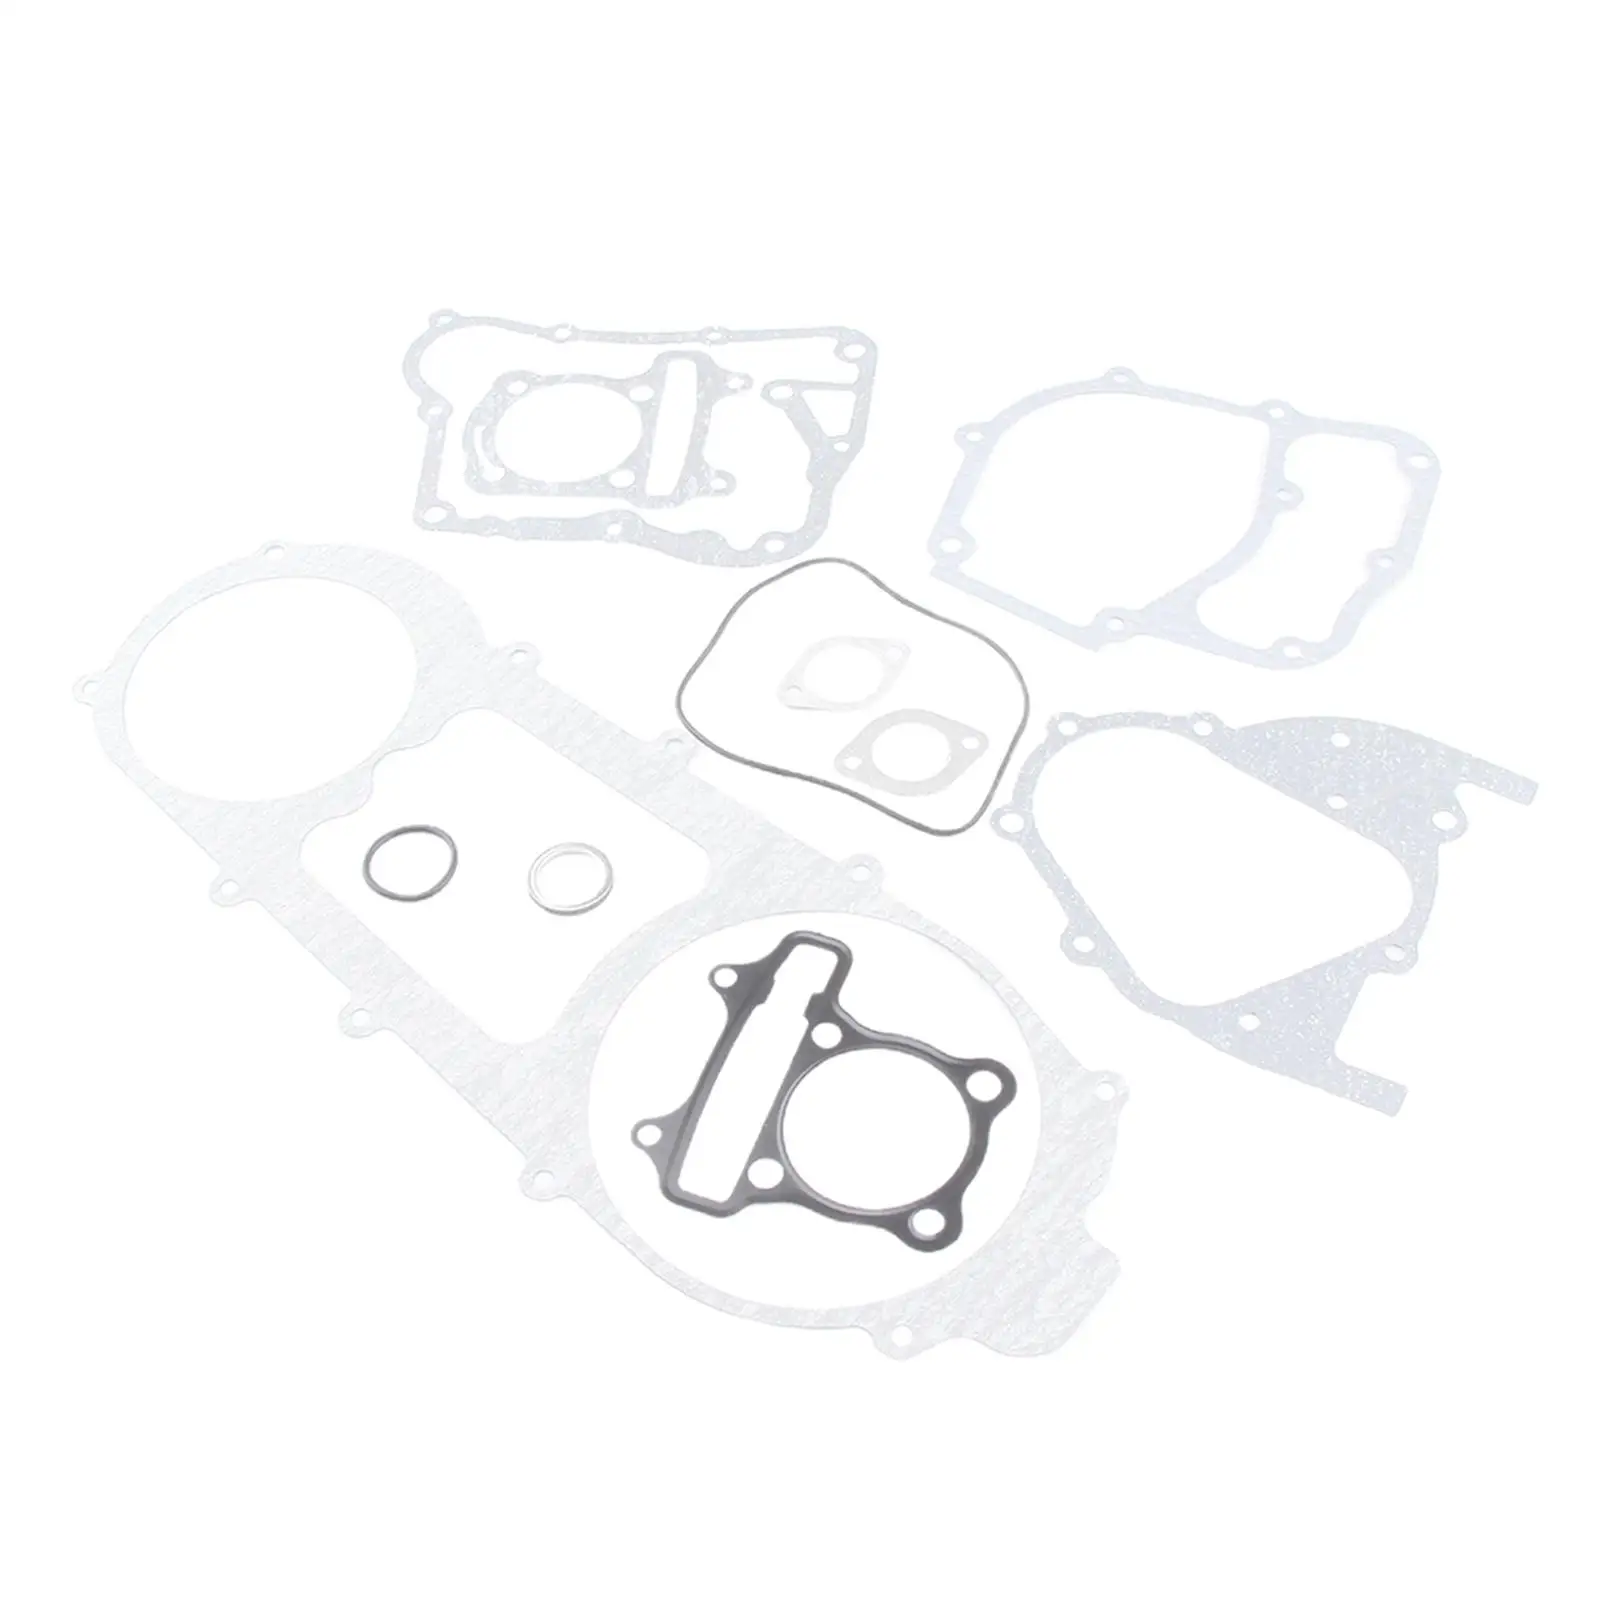  Set of Engine Head Gaskets for GY6 150 Karts Quad Mopeds, Quality